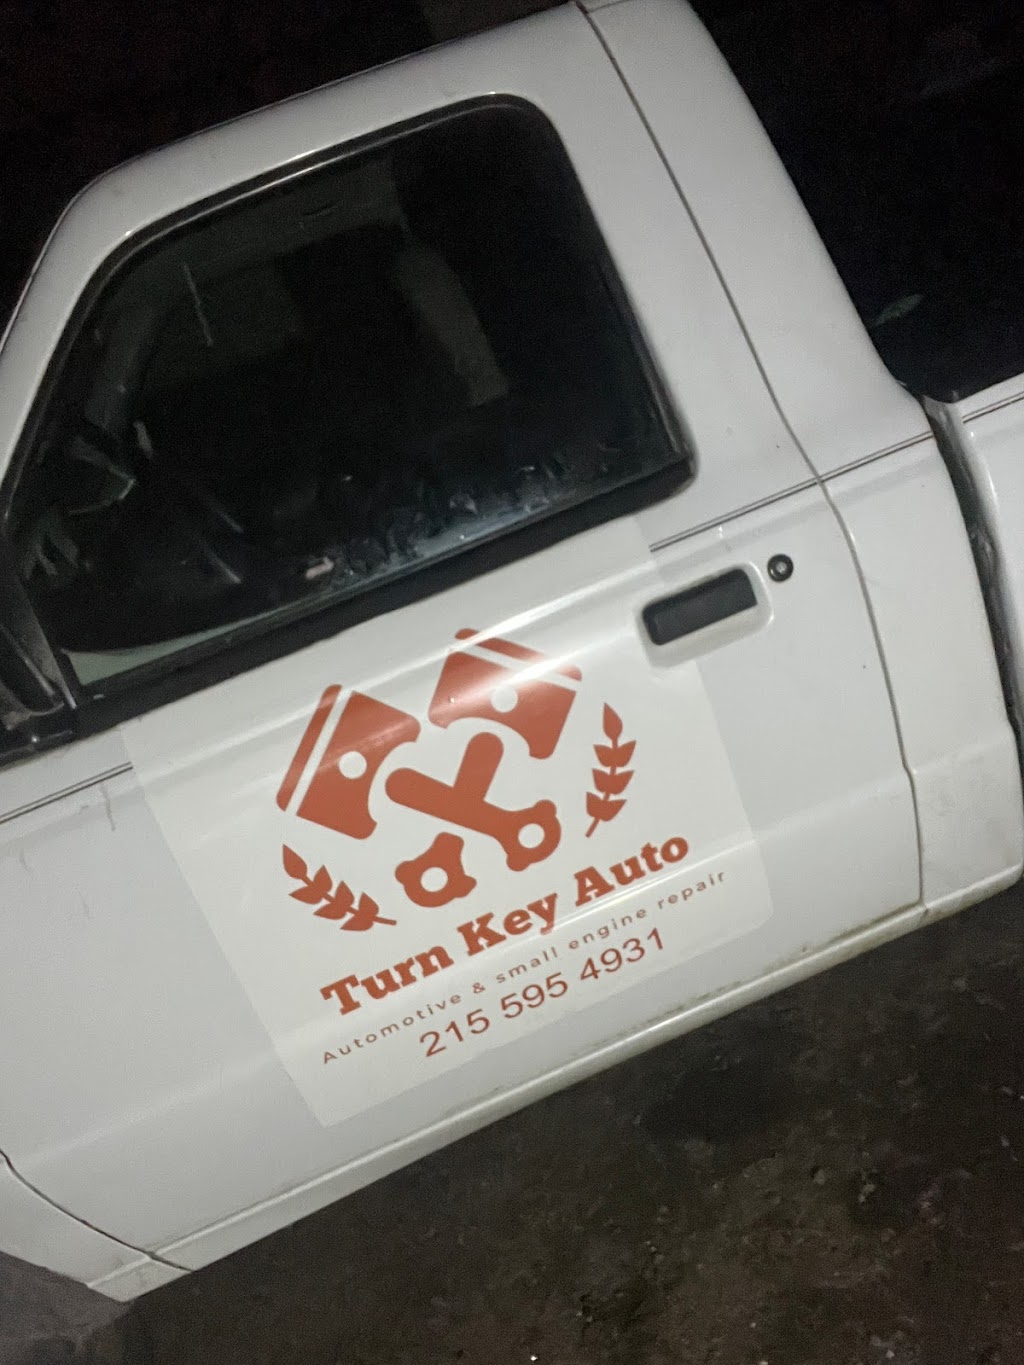 Turn key auto | 1 Lewis Ave, Morrisville, PA 19067 | Phone: (215) 595-4931